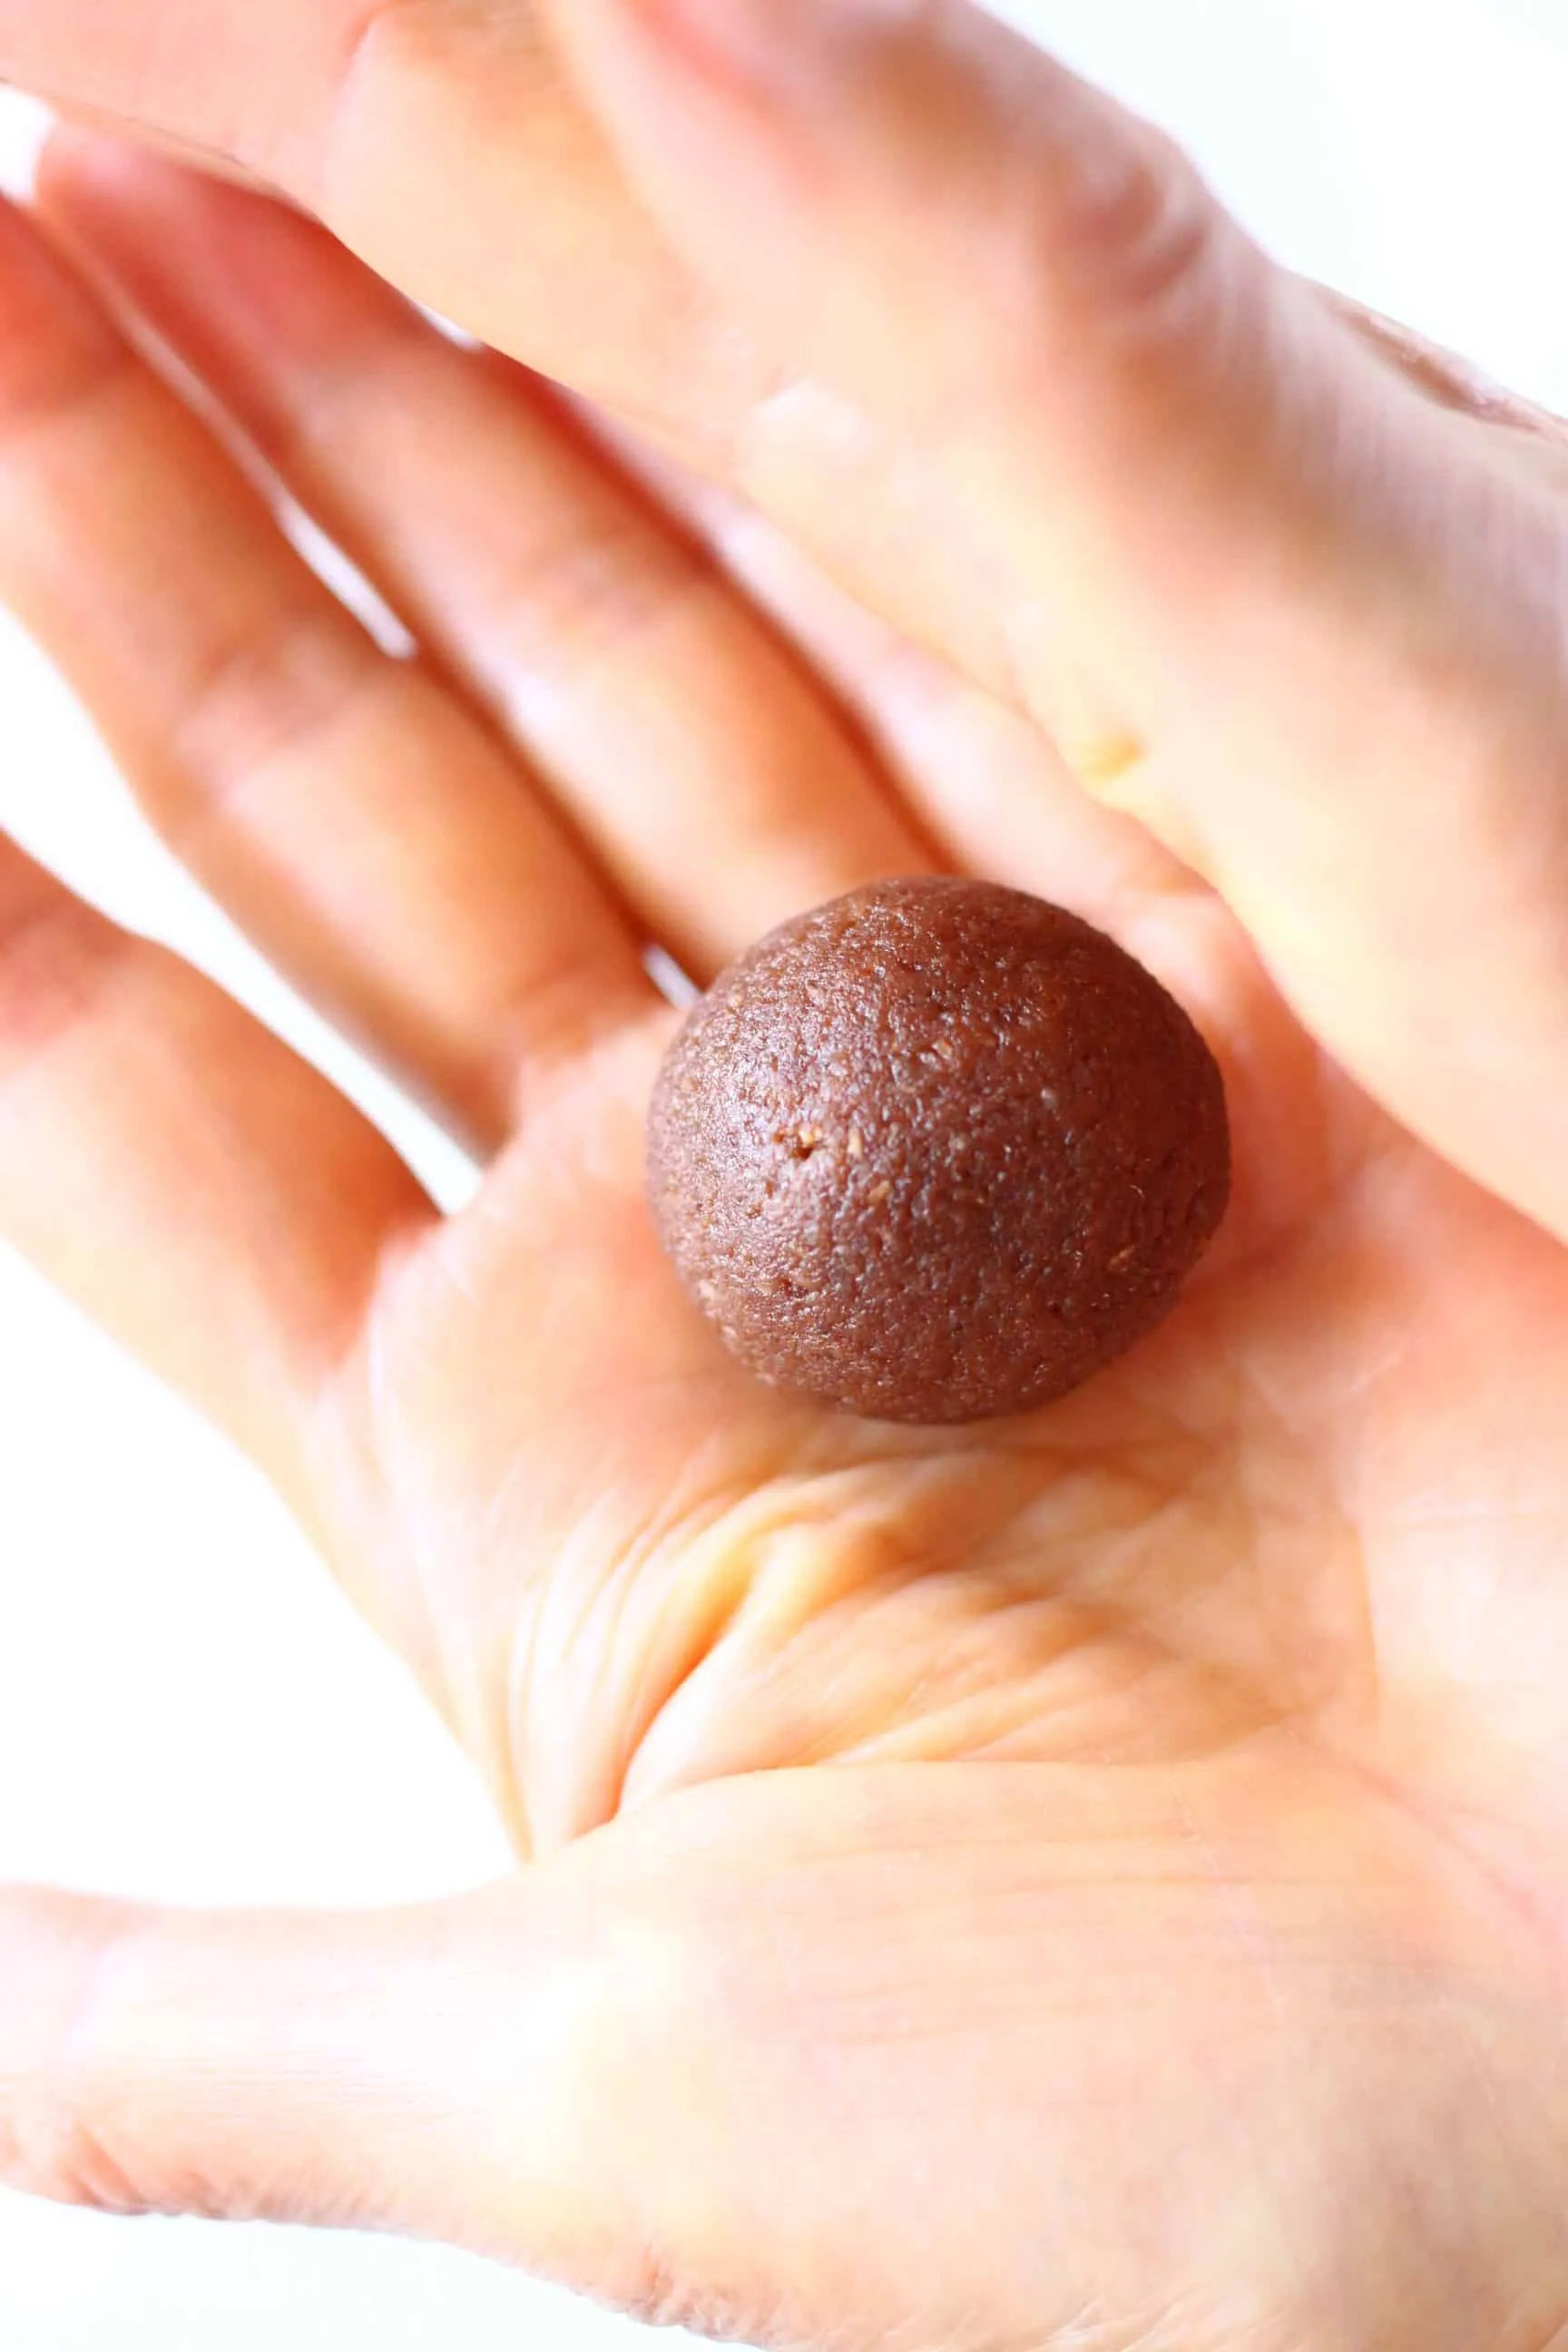 A round vegan protein ball being rolled between two hands